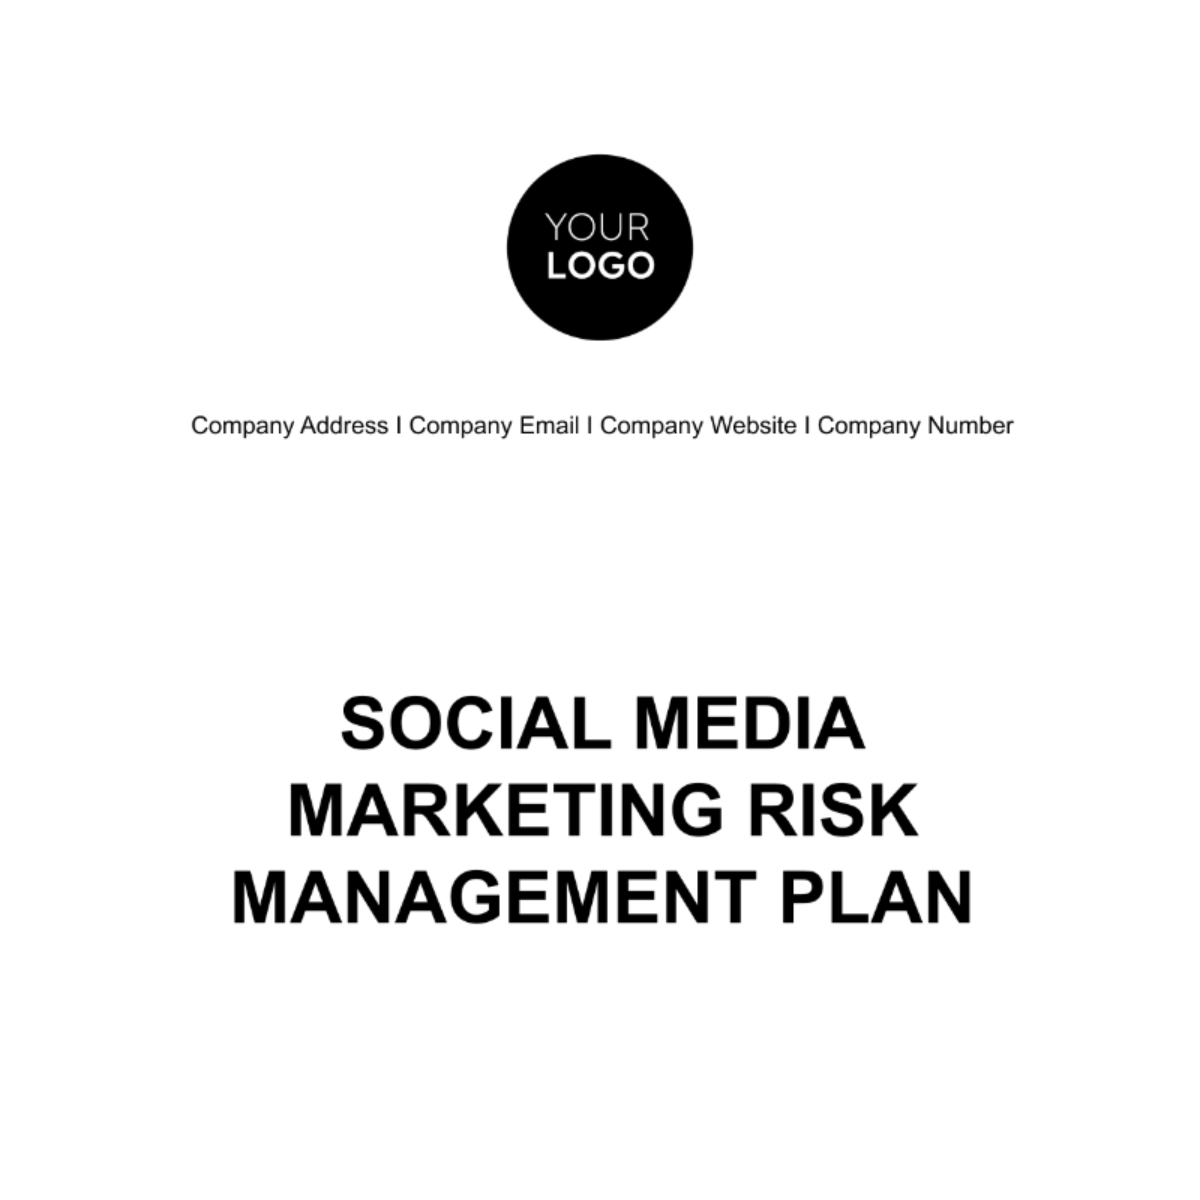 Social Media Marketing Risk Management Plan Template Edit Online And Download Example 2833